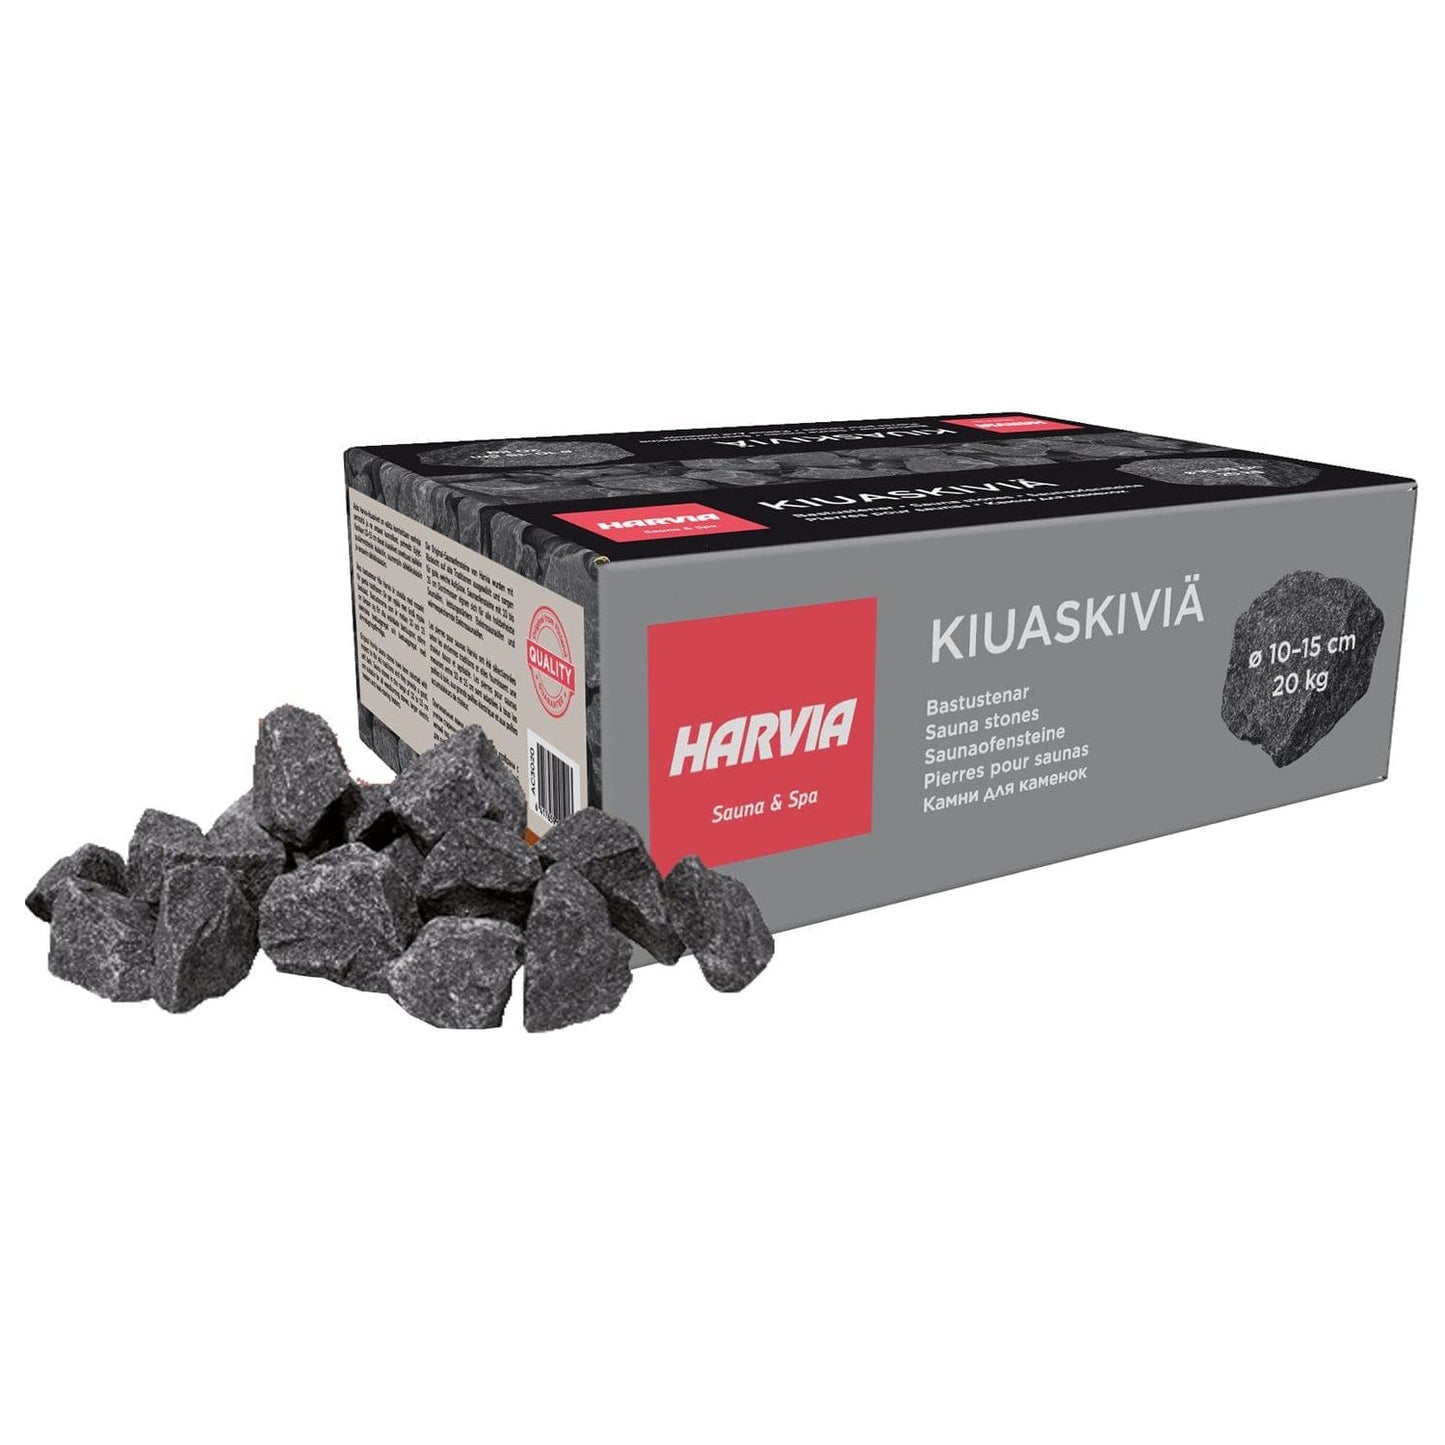 Sauna Wellness Shop Harvia, 5 boxes of 5-10cm stones *Not Sold Separately